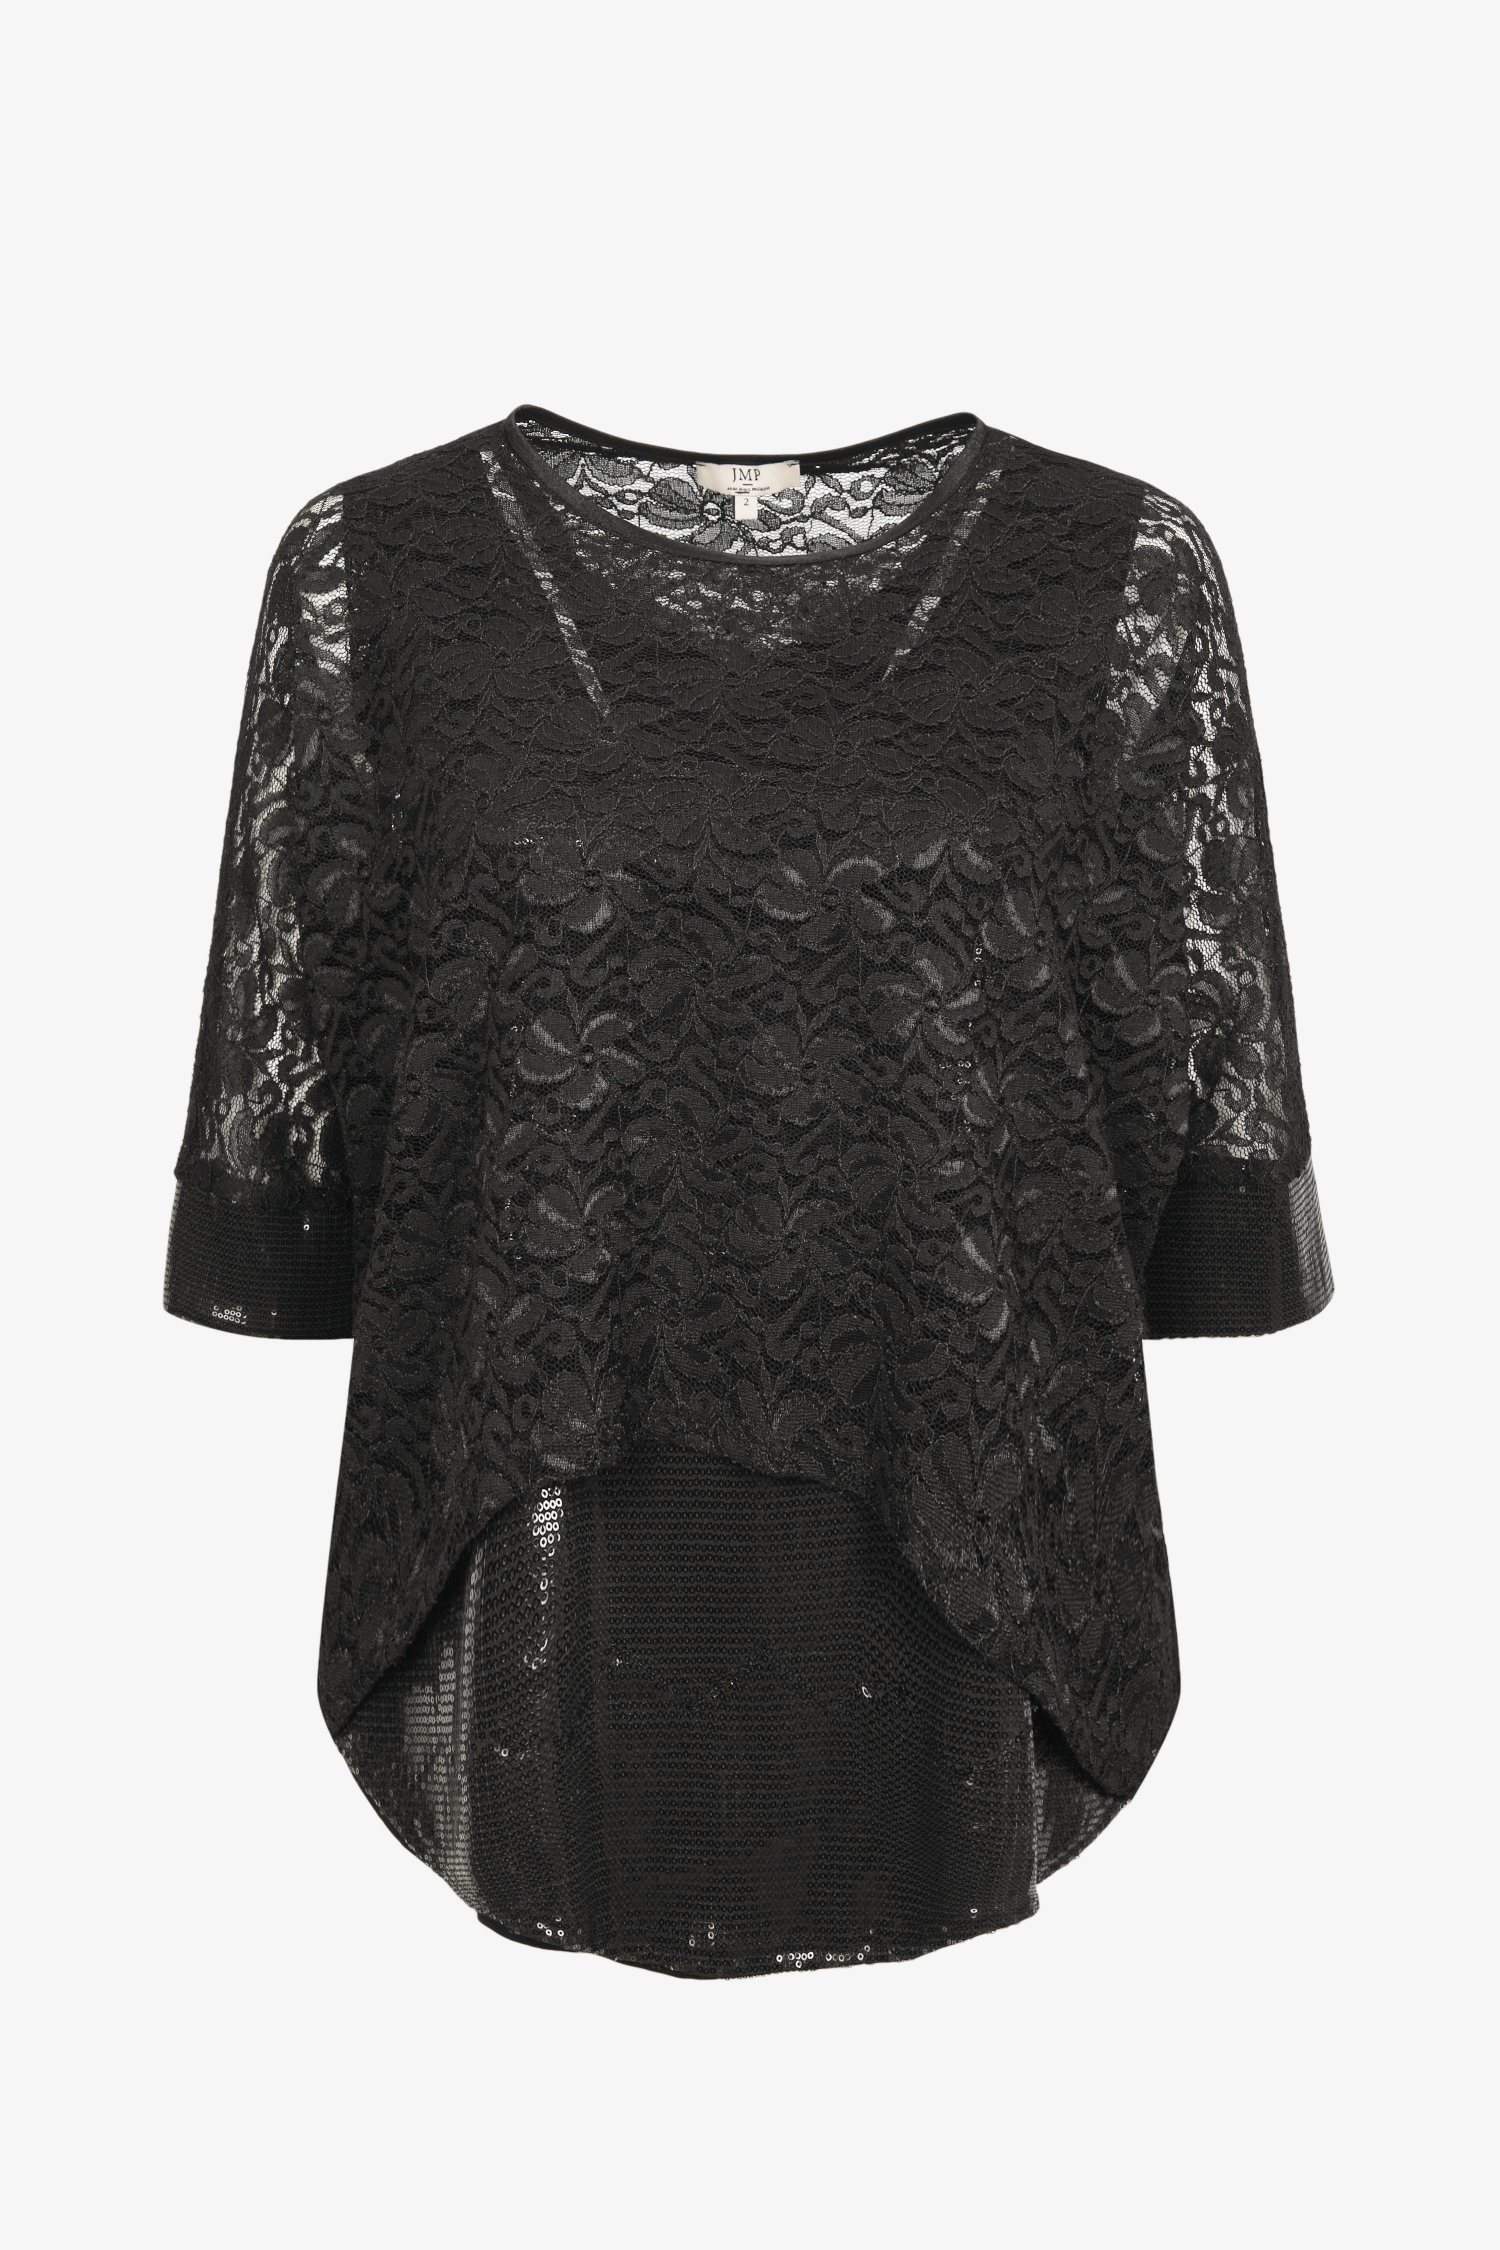 Oversized lace and sequin t-shirt (shipping November 15/20)